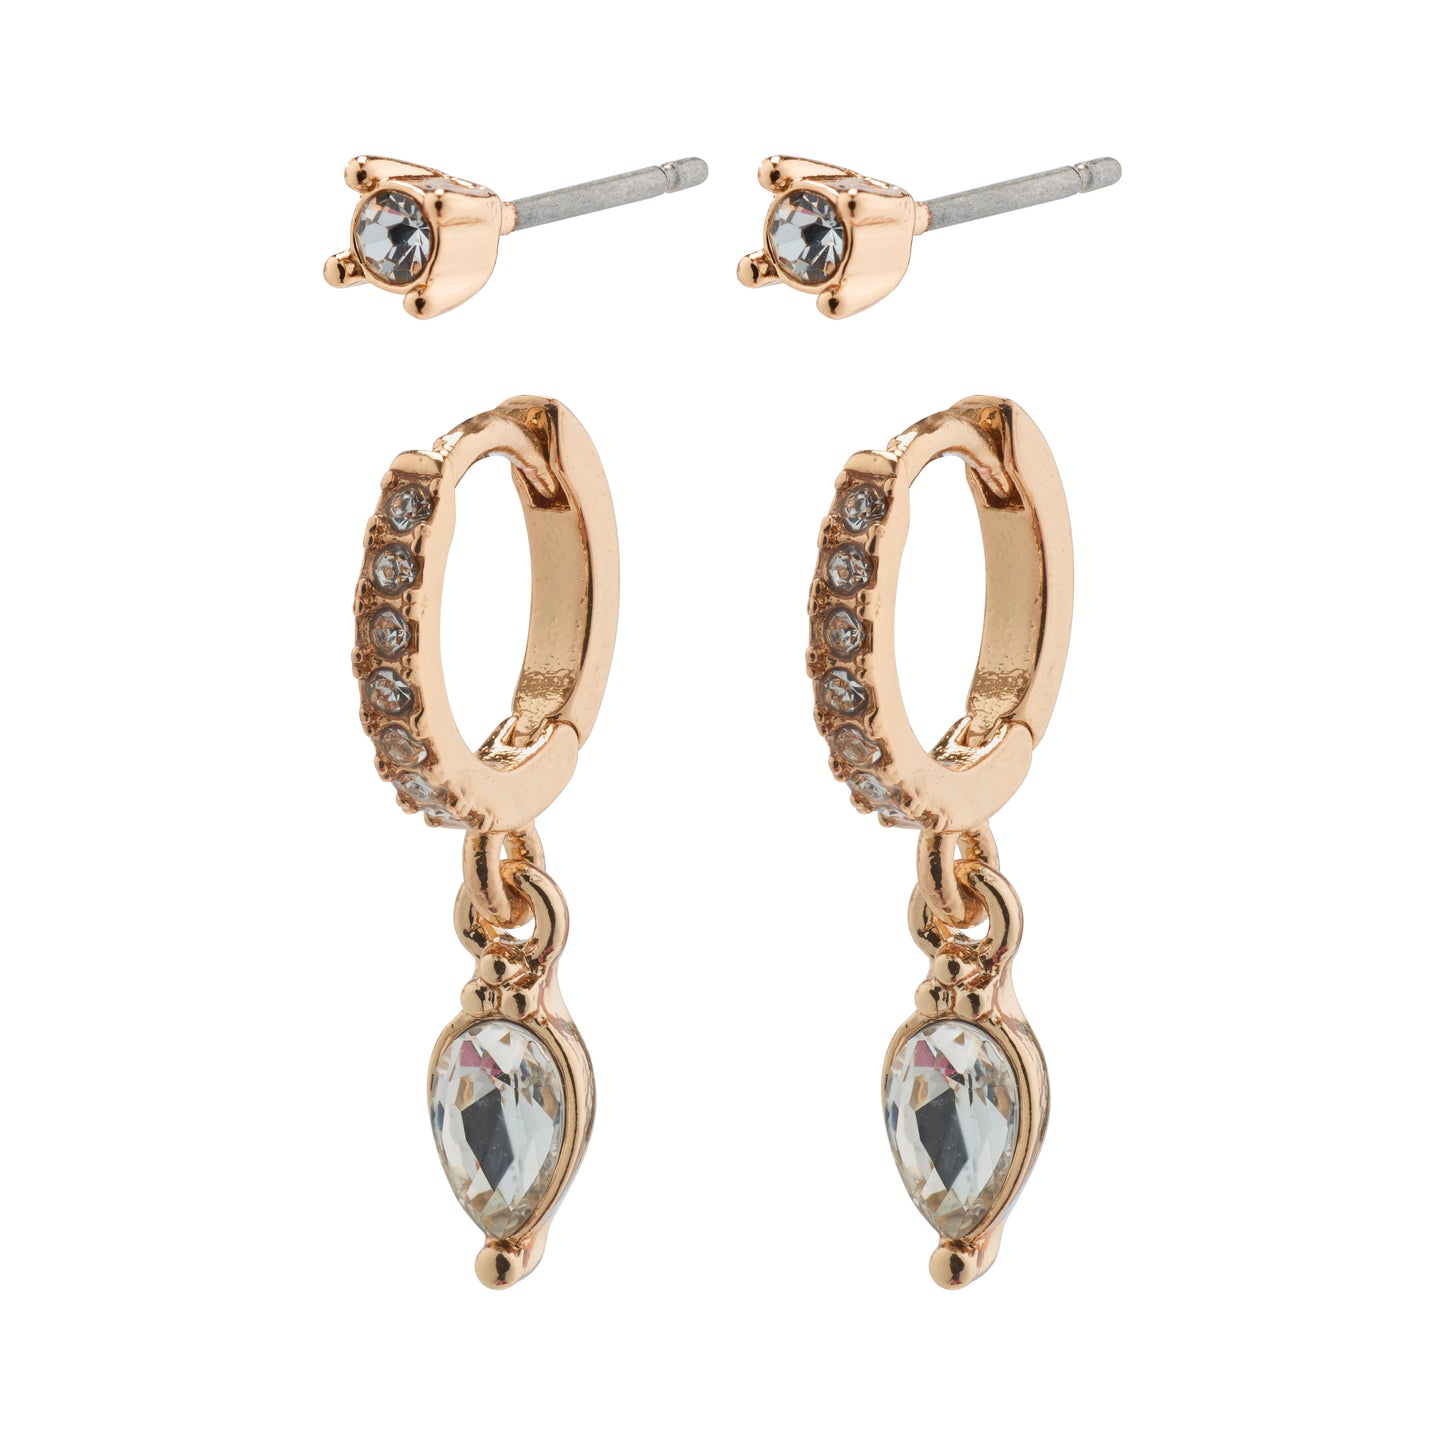 ELZA recycled crystal earrings 2-in-1 set rosegold-plated